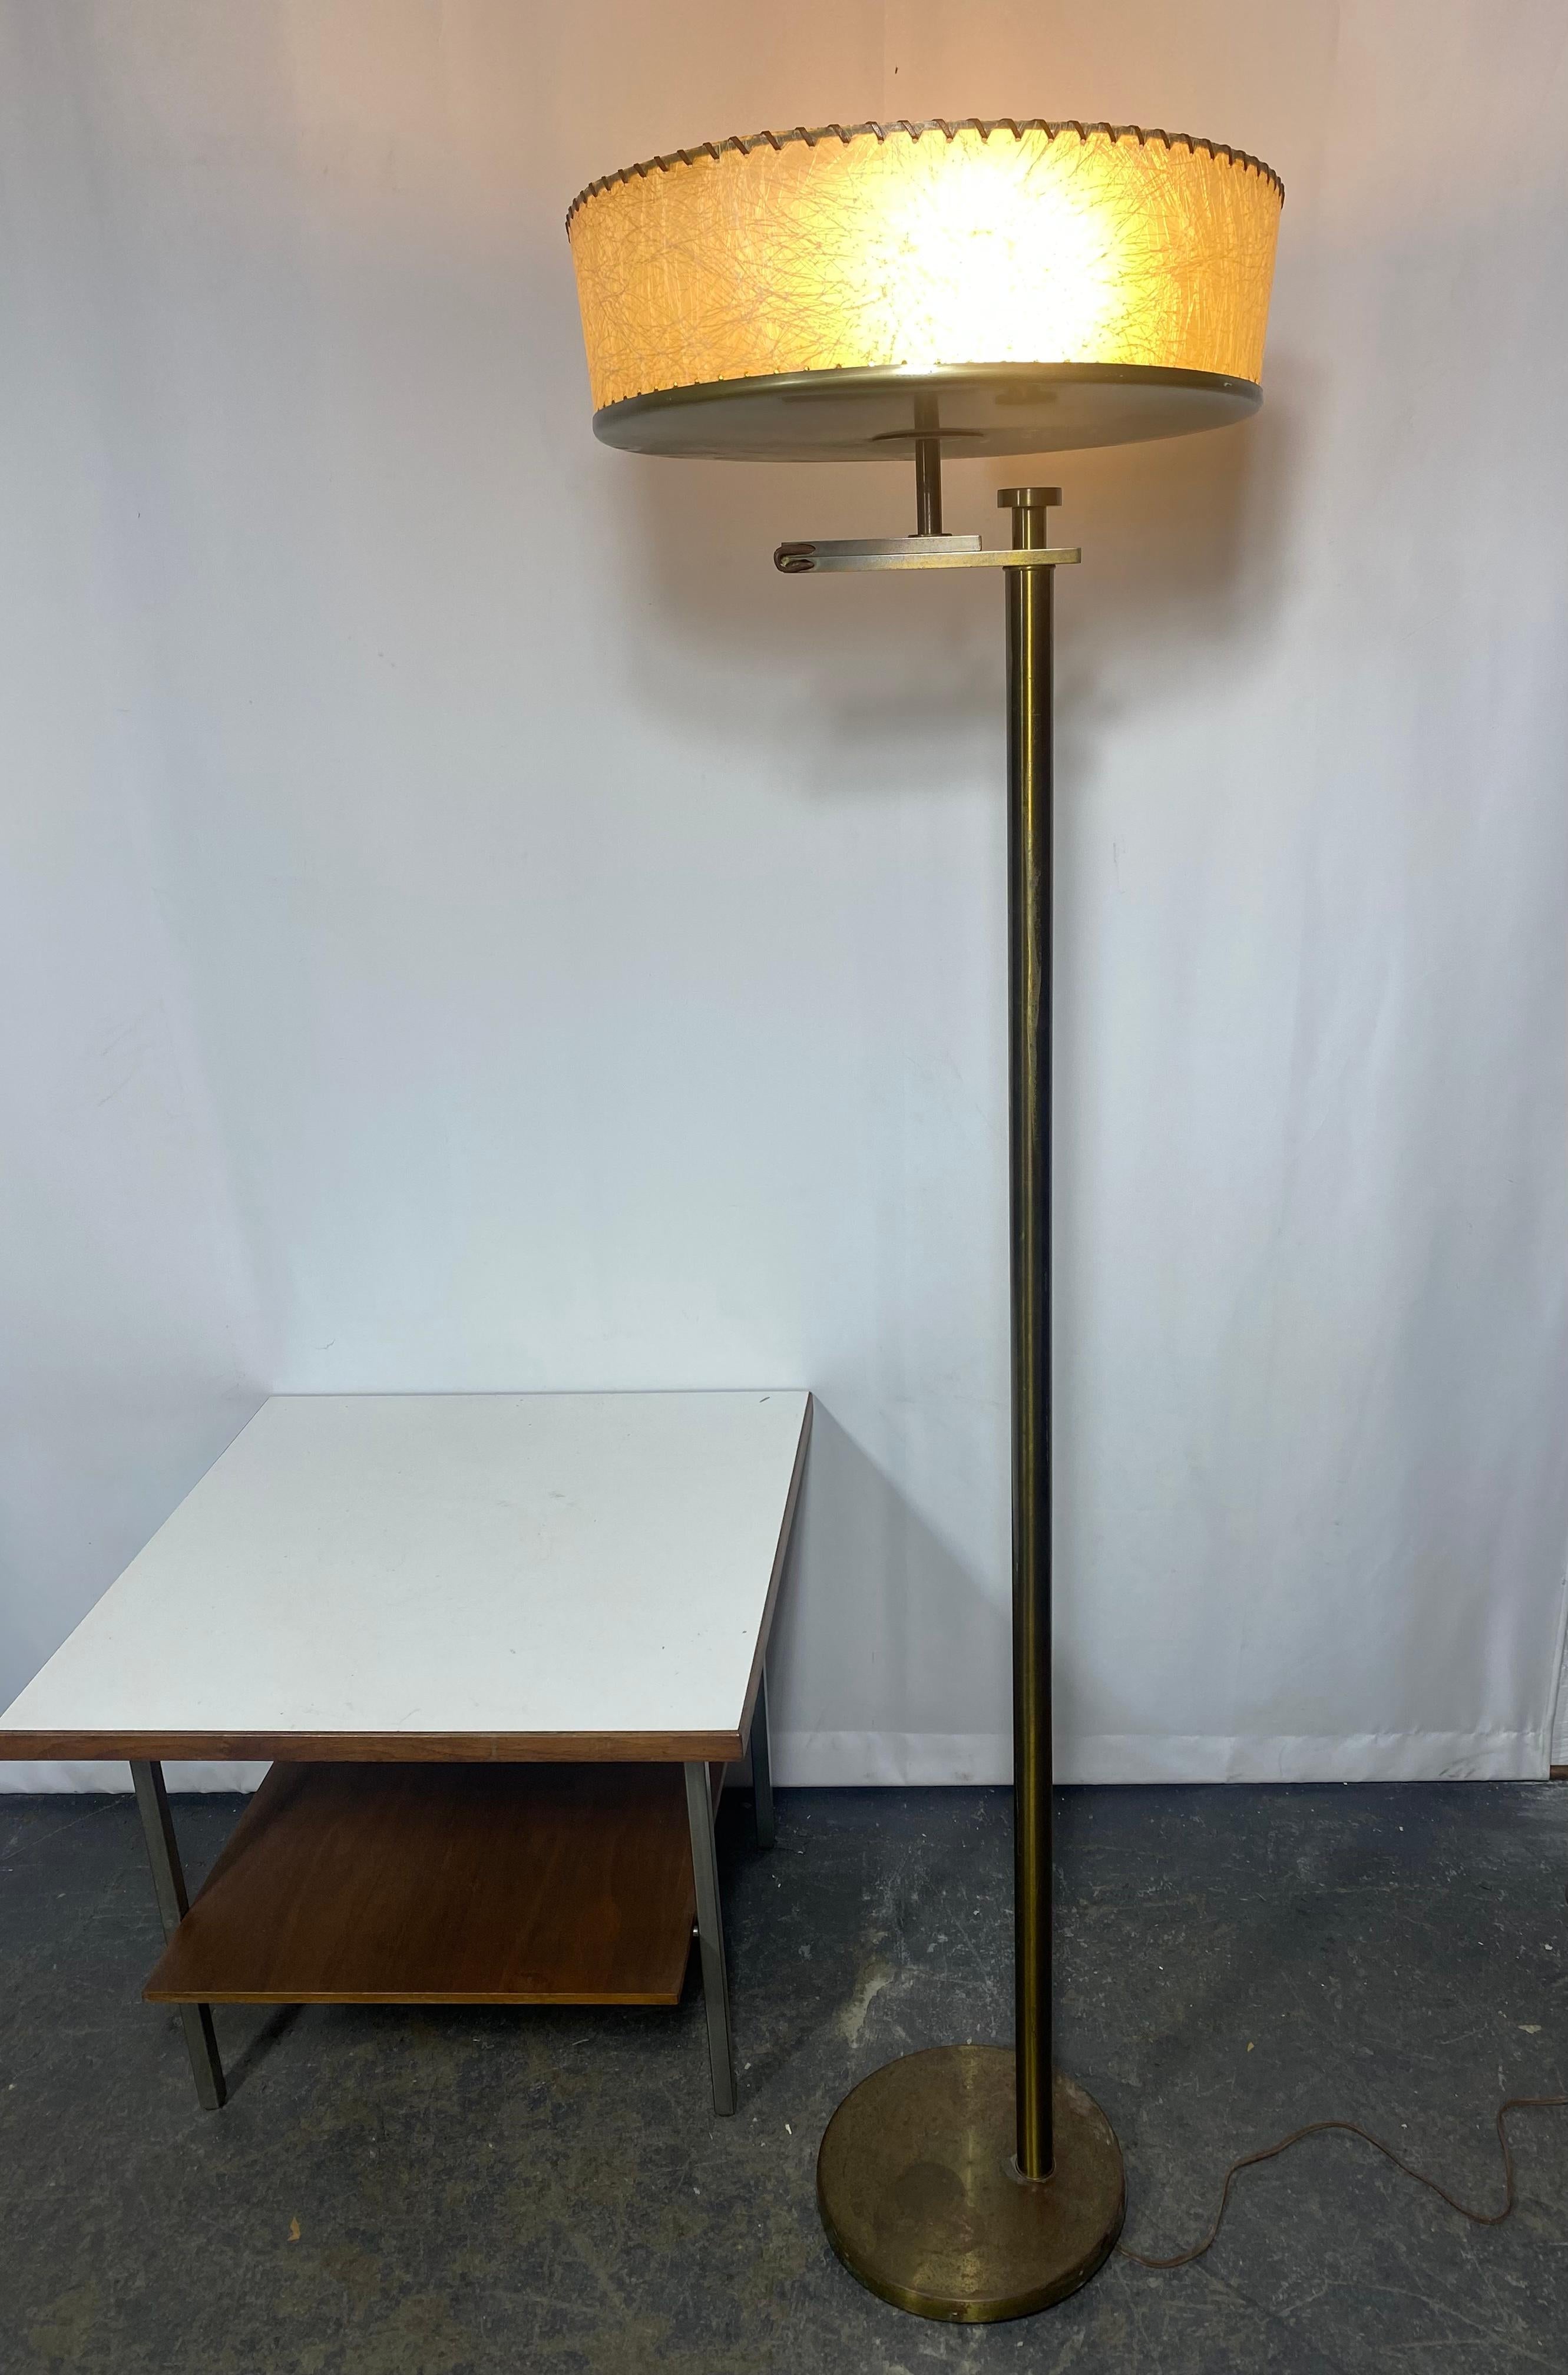 Simple and elegant Flip floor lamp by Kurt Versen. Spectacular design from 1935 where the lamp doubles as a reading lamp and a torchiere. Just flip the shade upward or downward and it looks amazing in either position.Retains original (often